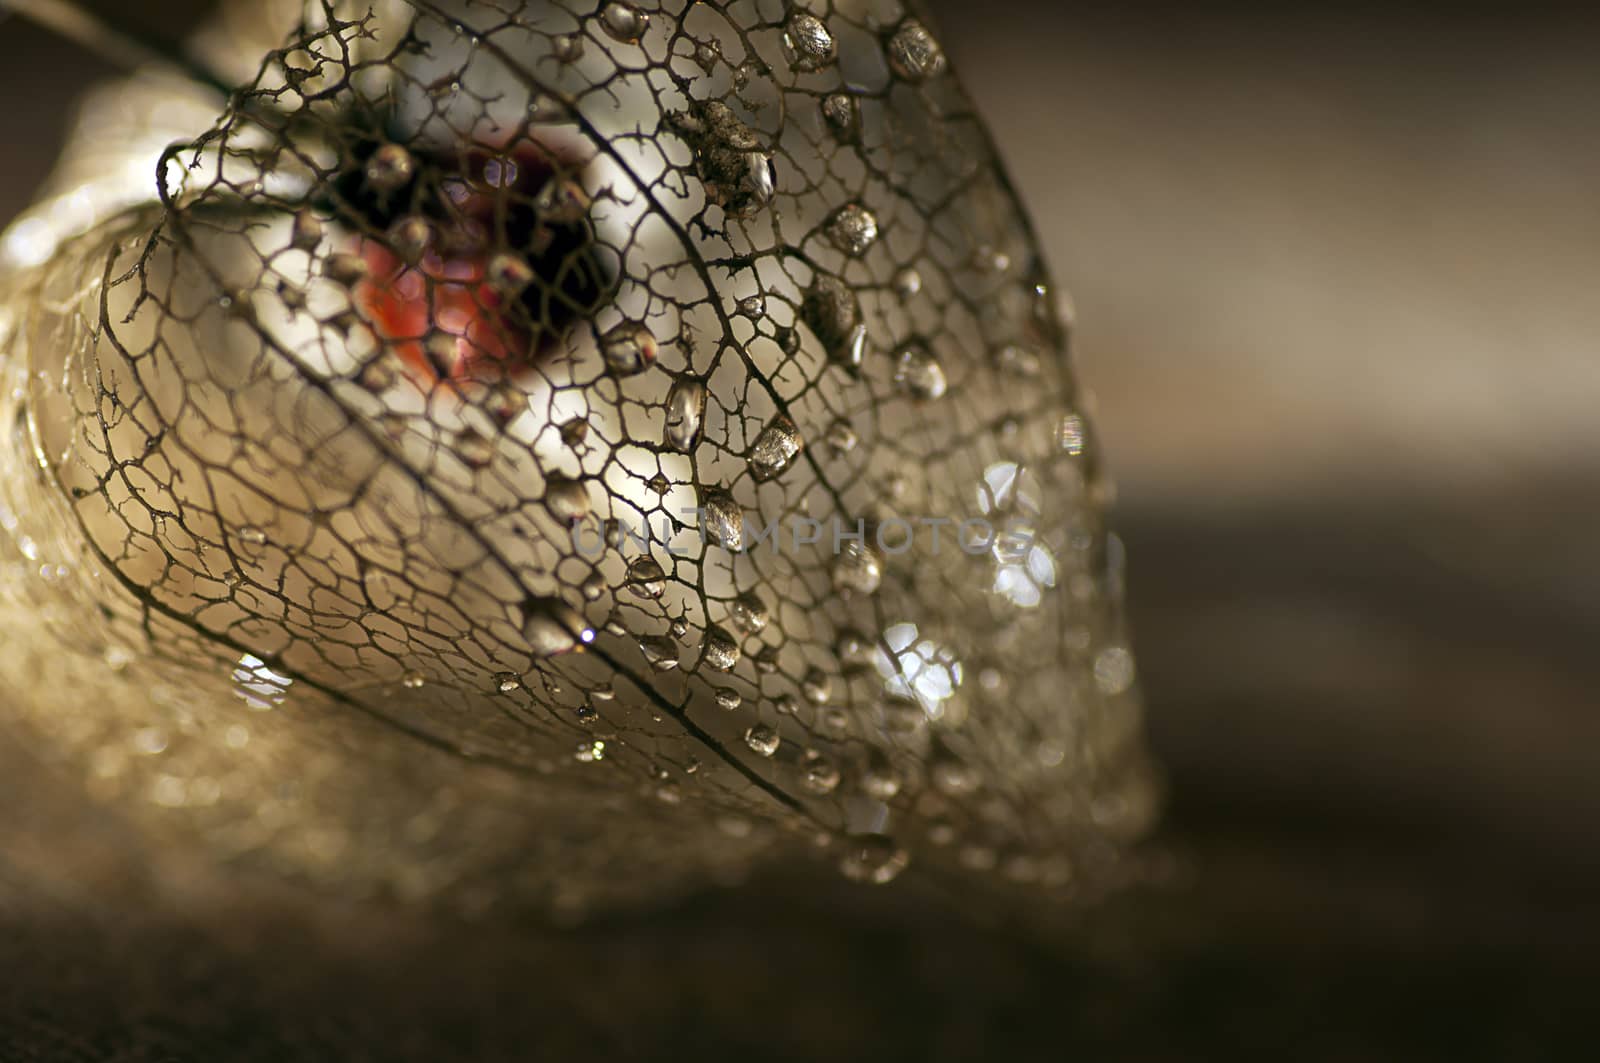 Dried physalis lantern close up by dred